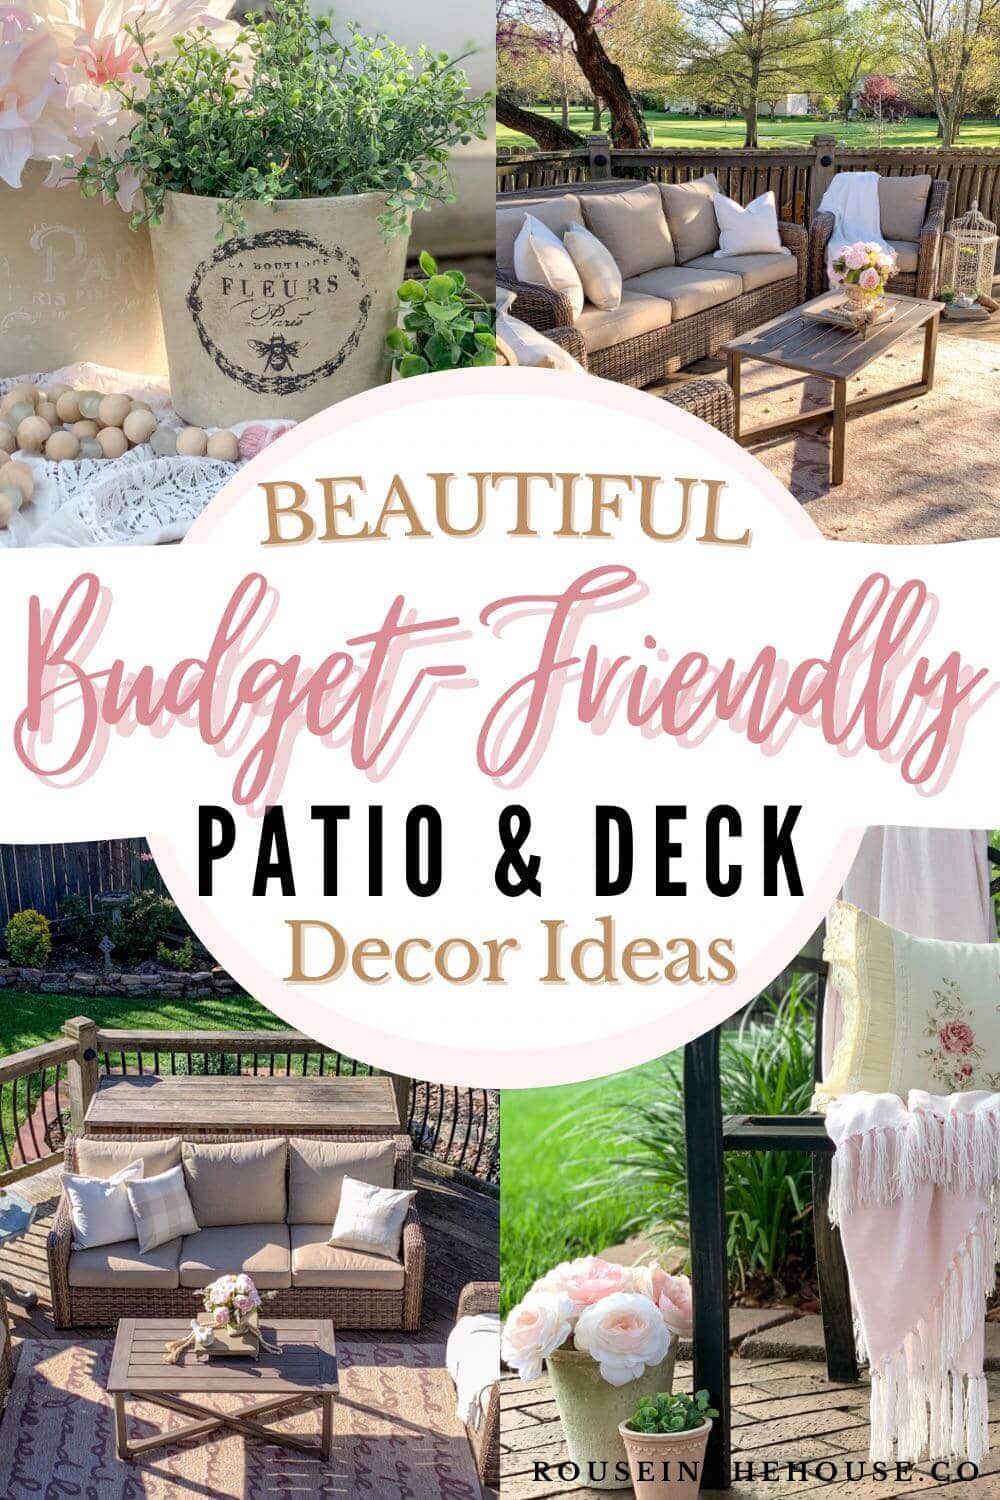 Graphic of backyard deck ideas on a budget.